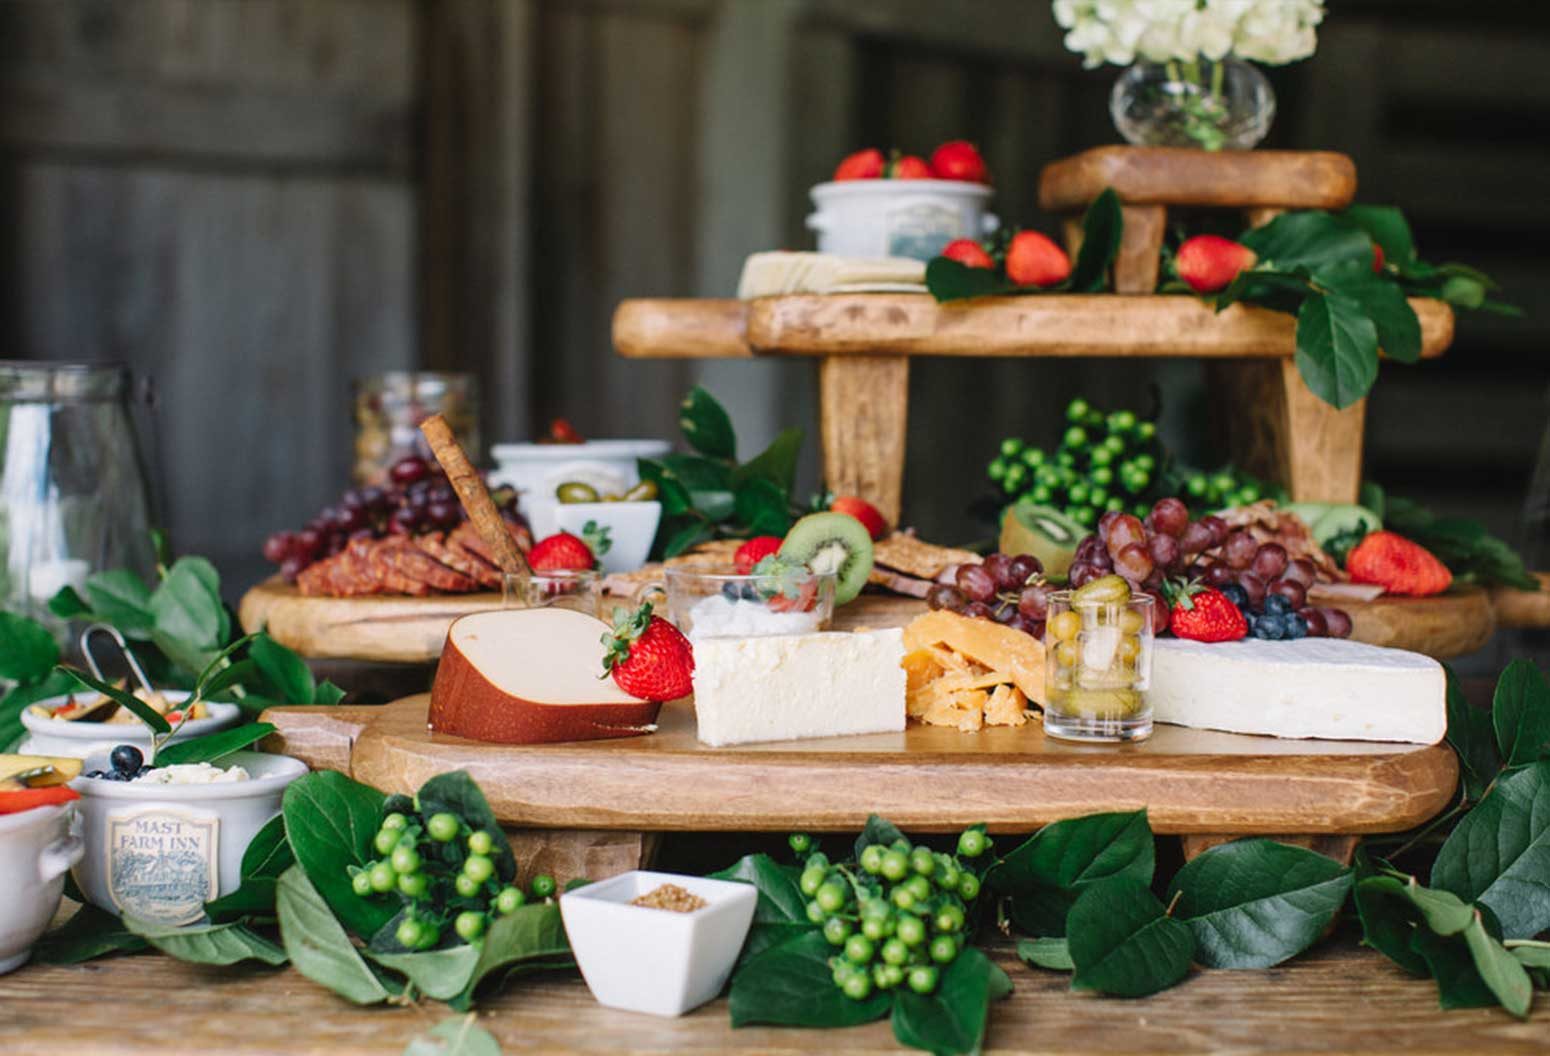 Beautifully arranged fruit, cheese and charcuterie trays